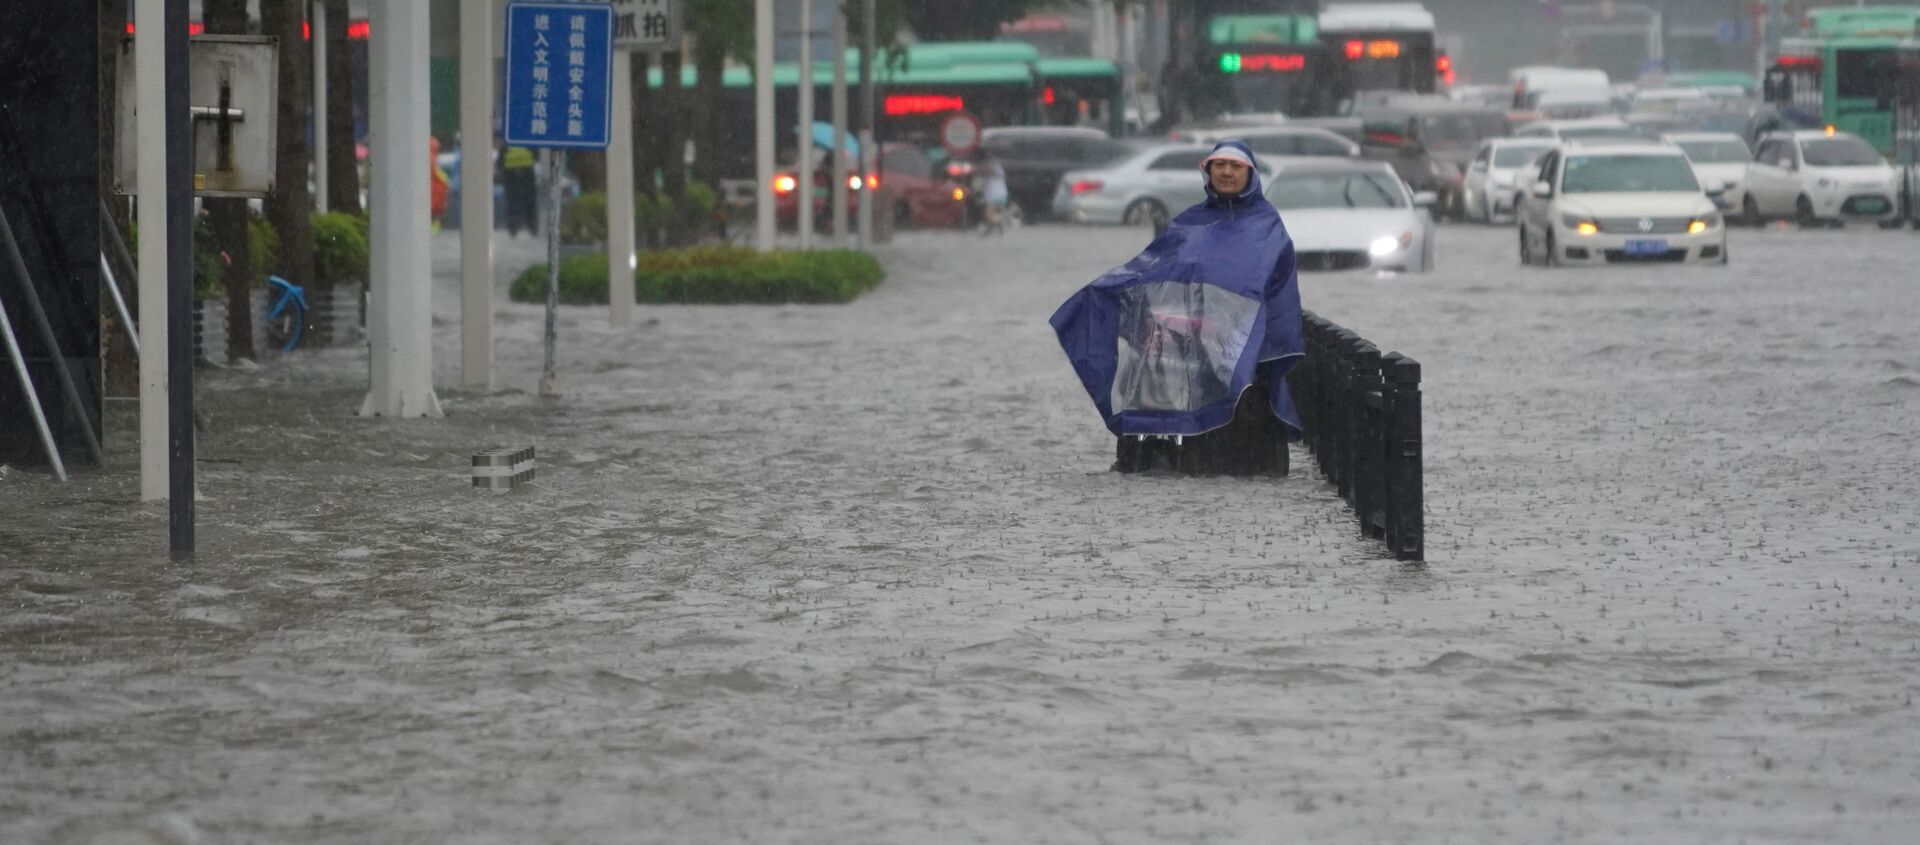 A resident wearing a rain cover stands on a flooded road in Zhengzhou, Henan province, China July 20, 2021. - Sputnik International, 1920, 20.07.2021